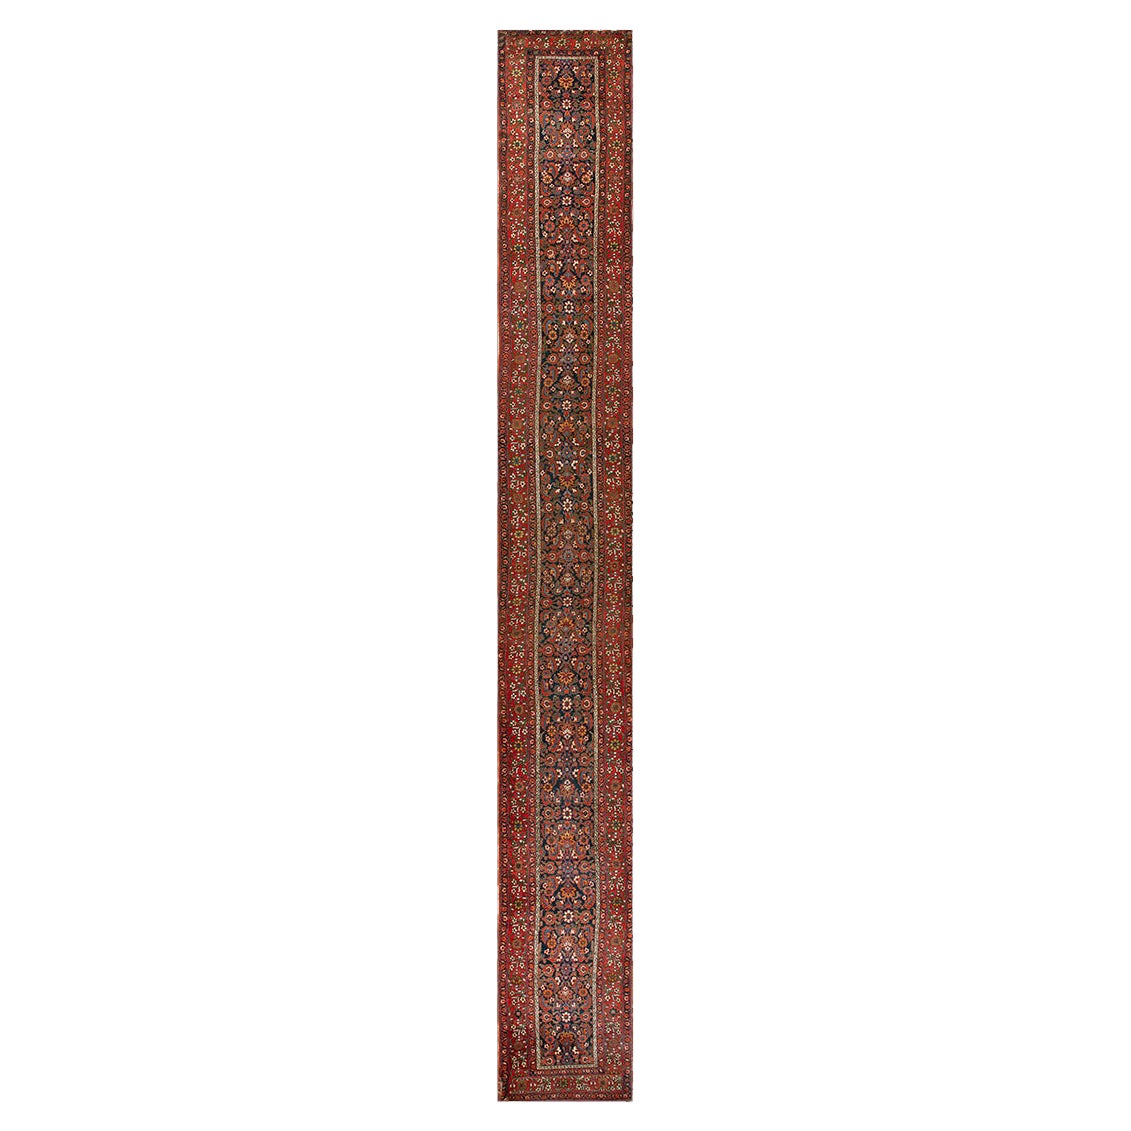 Early 20th Century N.W. Persian Rug ( 2'9" x 20'9" - 84 x 632 ) For Sale